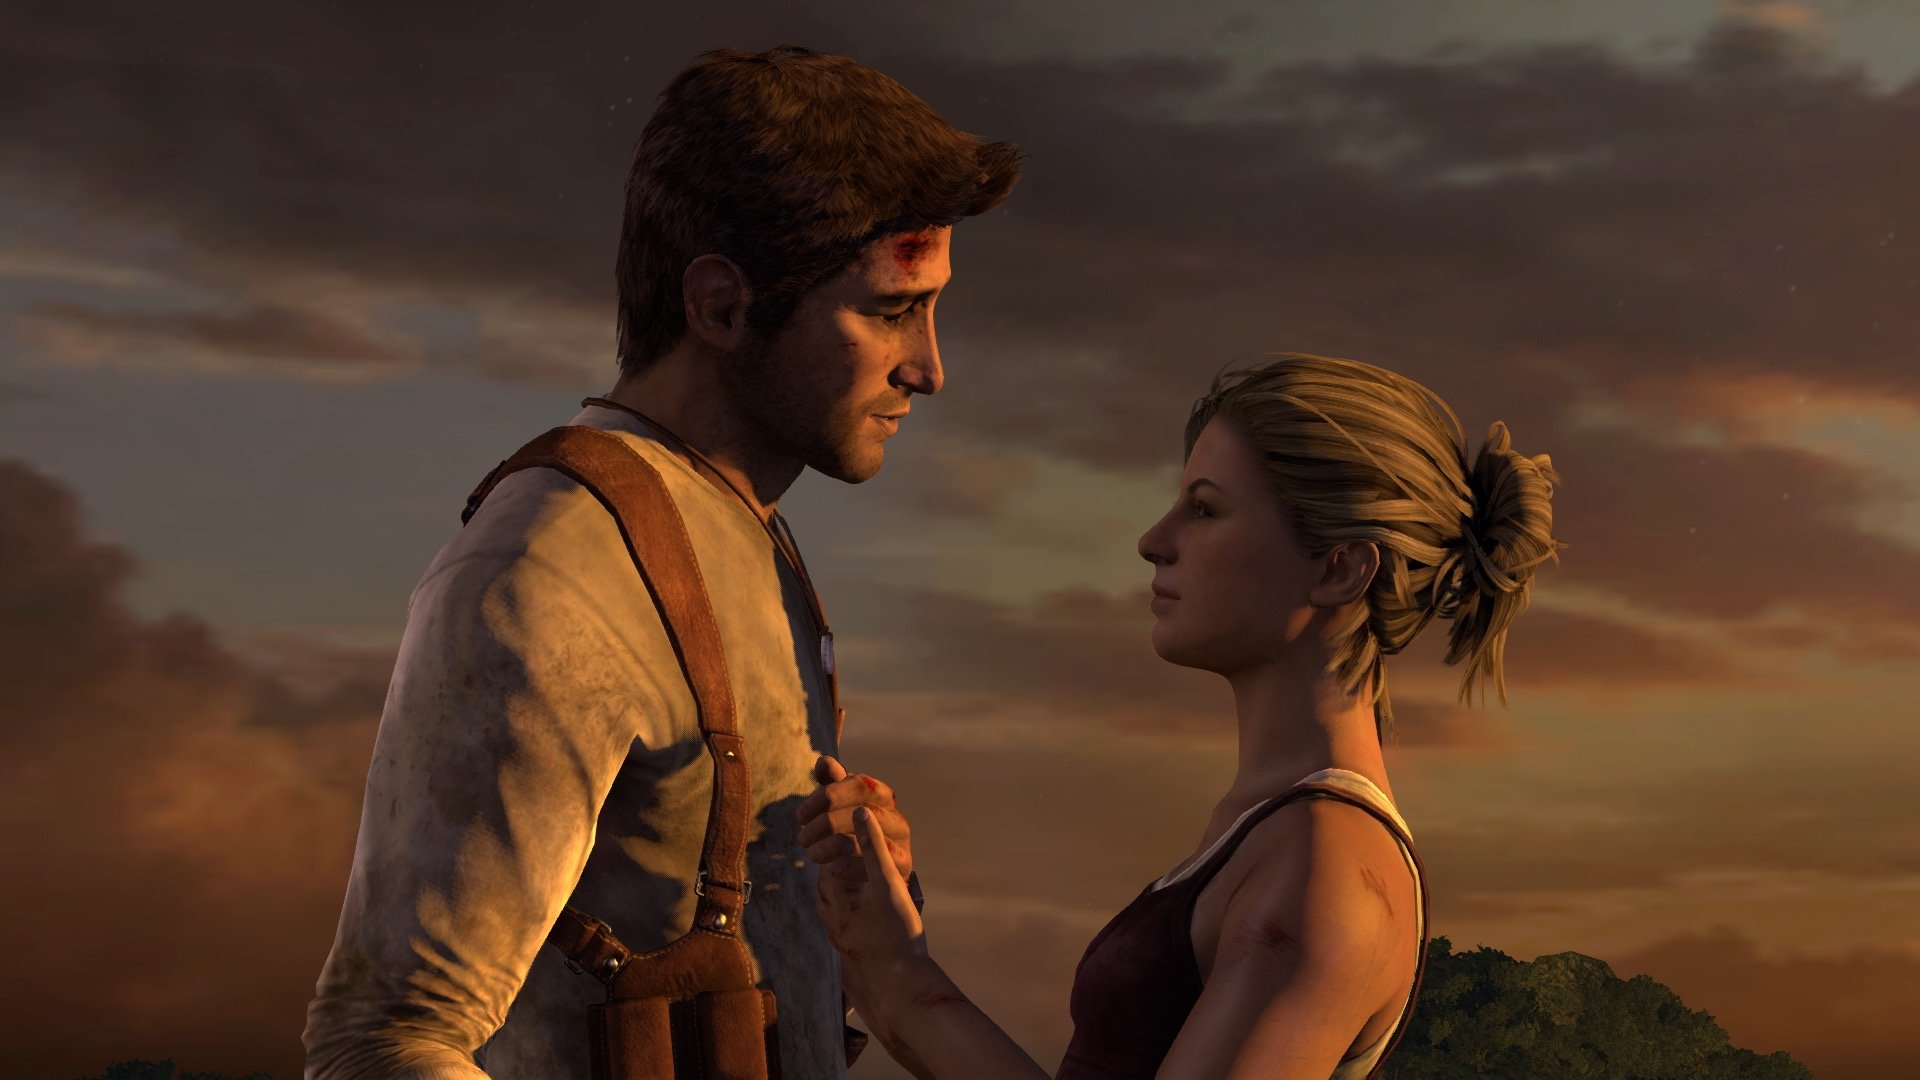 Uncharted' Has A Massive Divide Between Critic And Audience Ratings